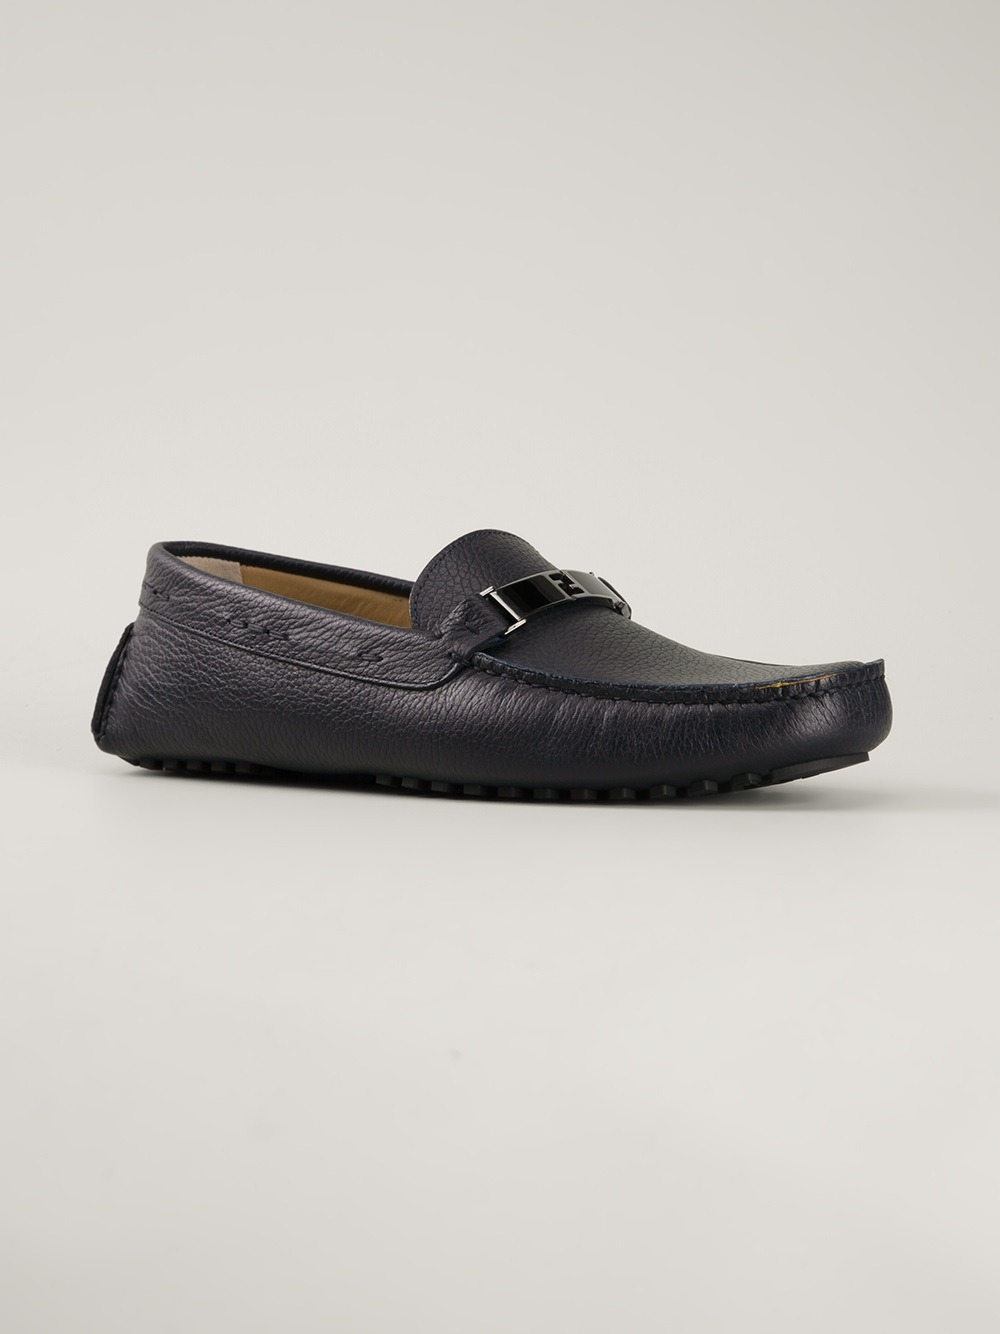 Fendi Signature Ff Driving Loafer in Blue for Men - Lyst